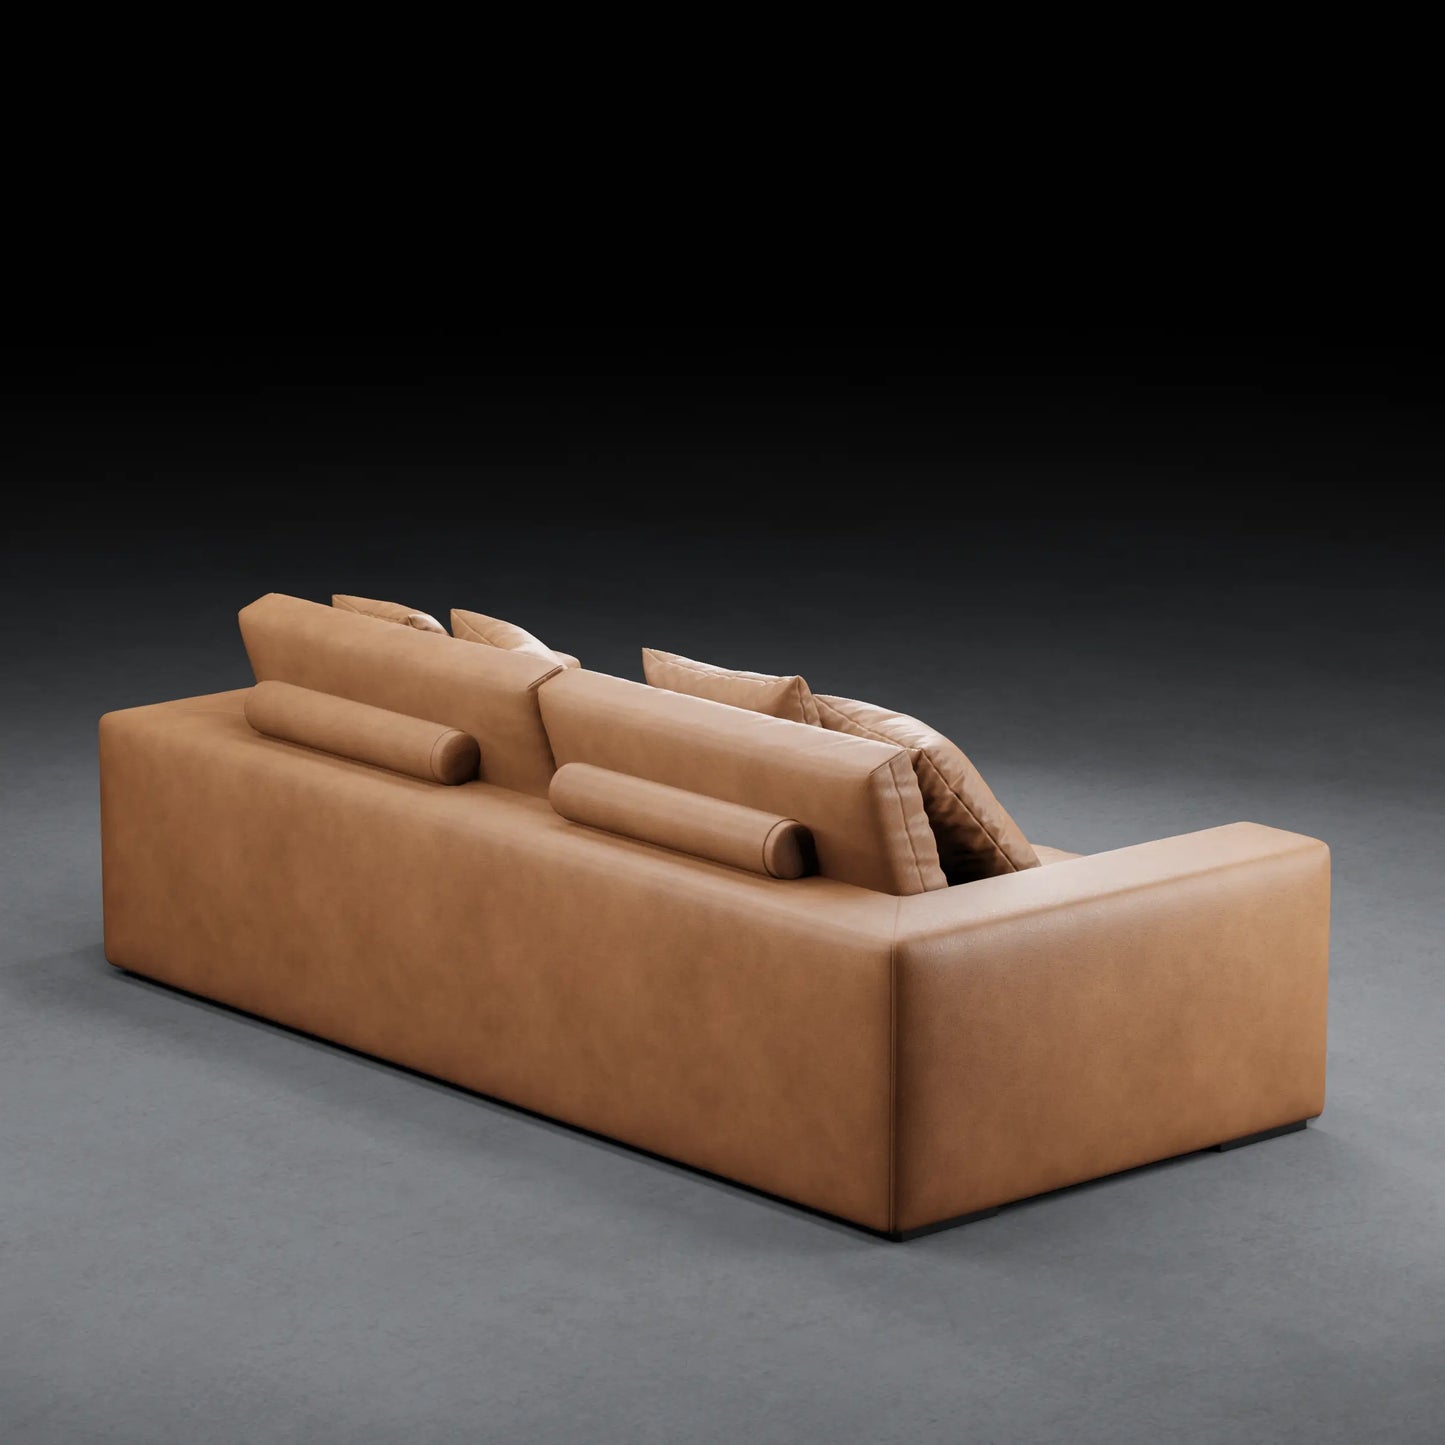 IVY - XL 2 Seater Couch in Leather Finish | Tan Color